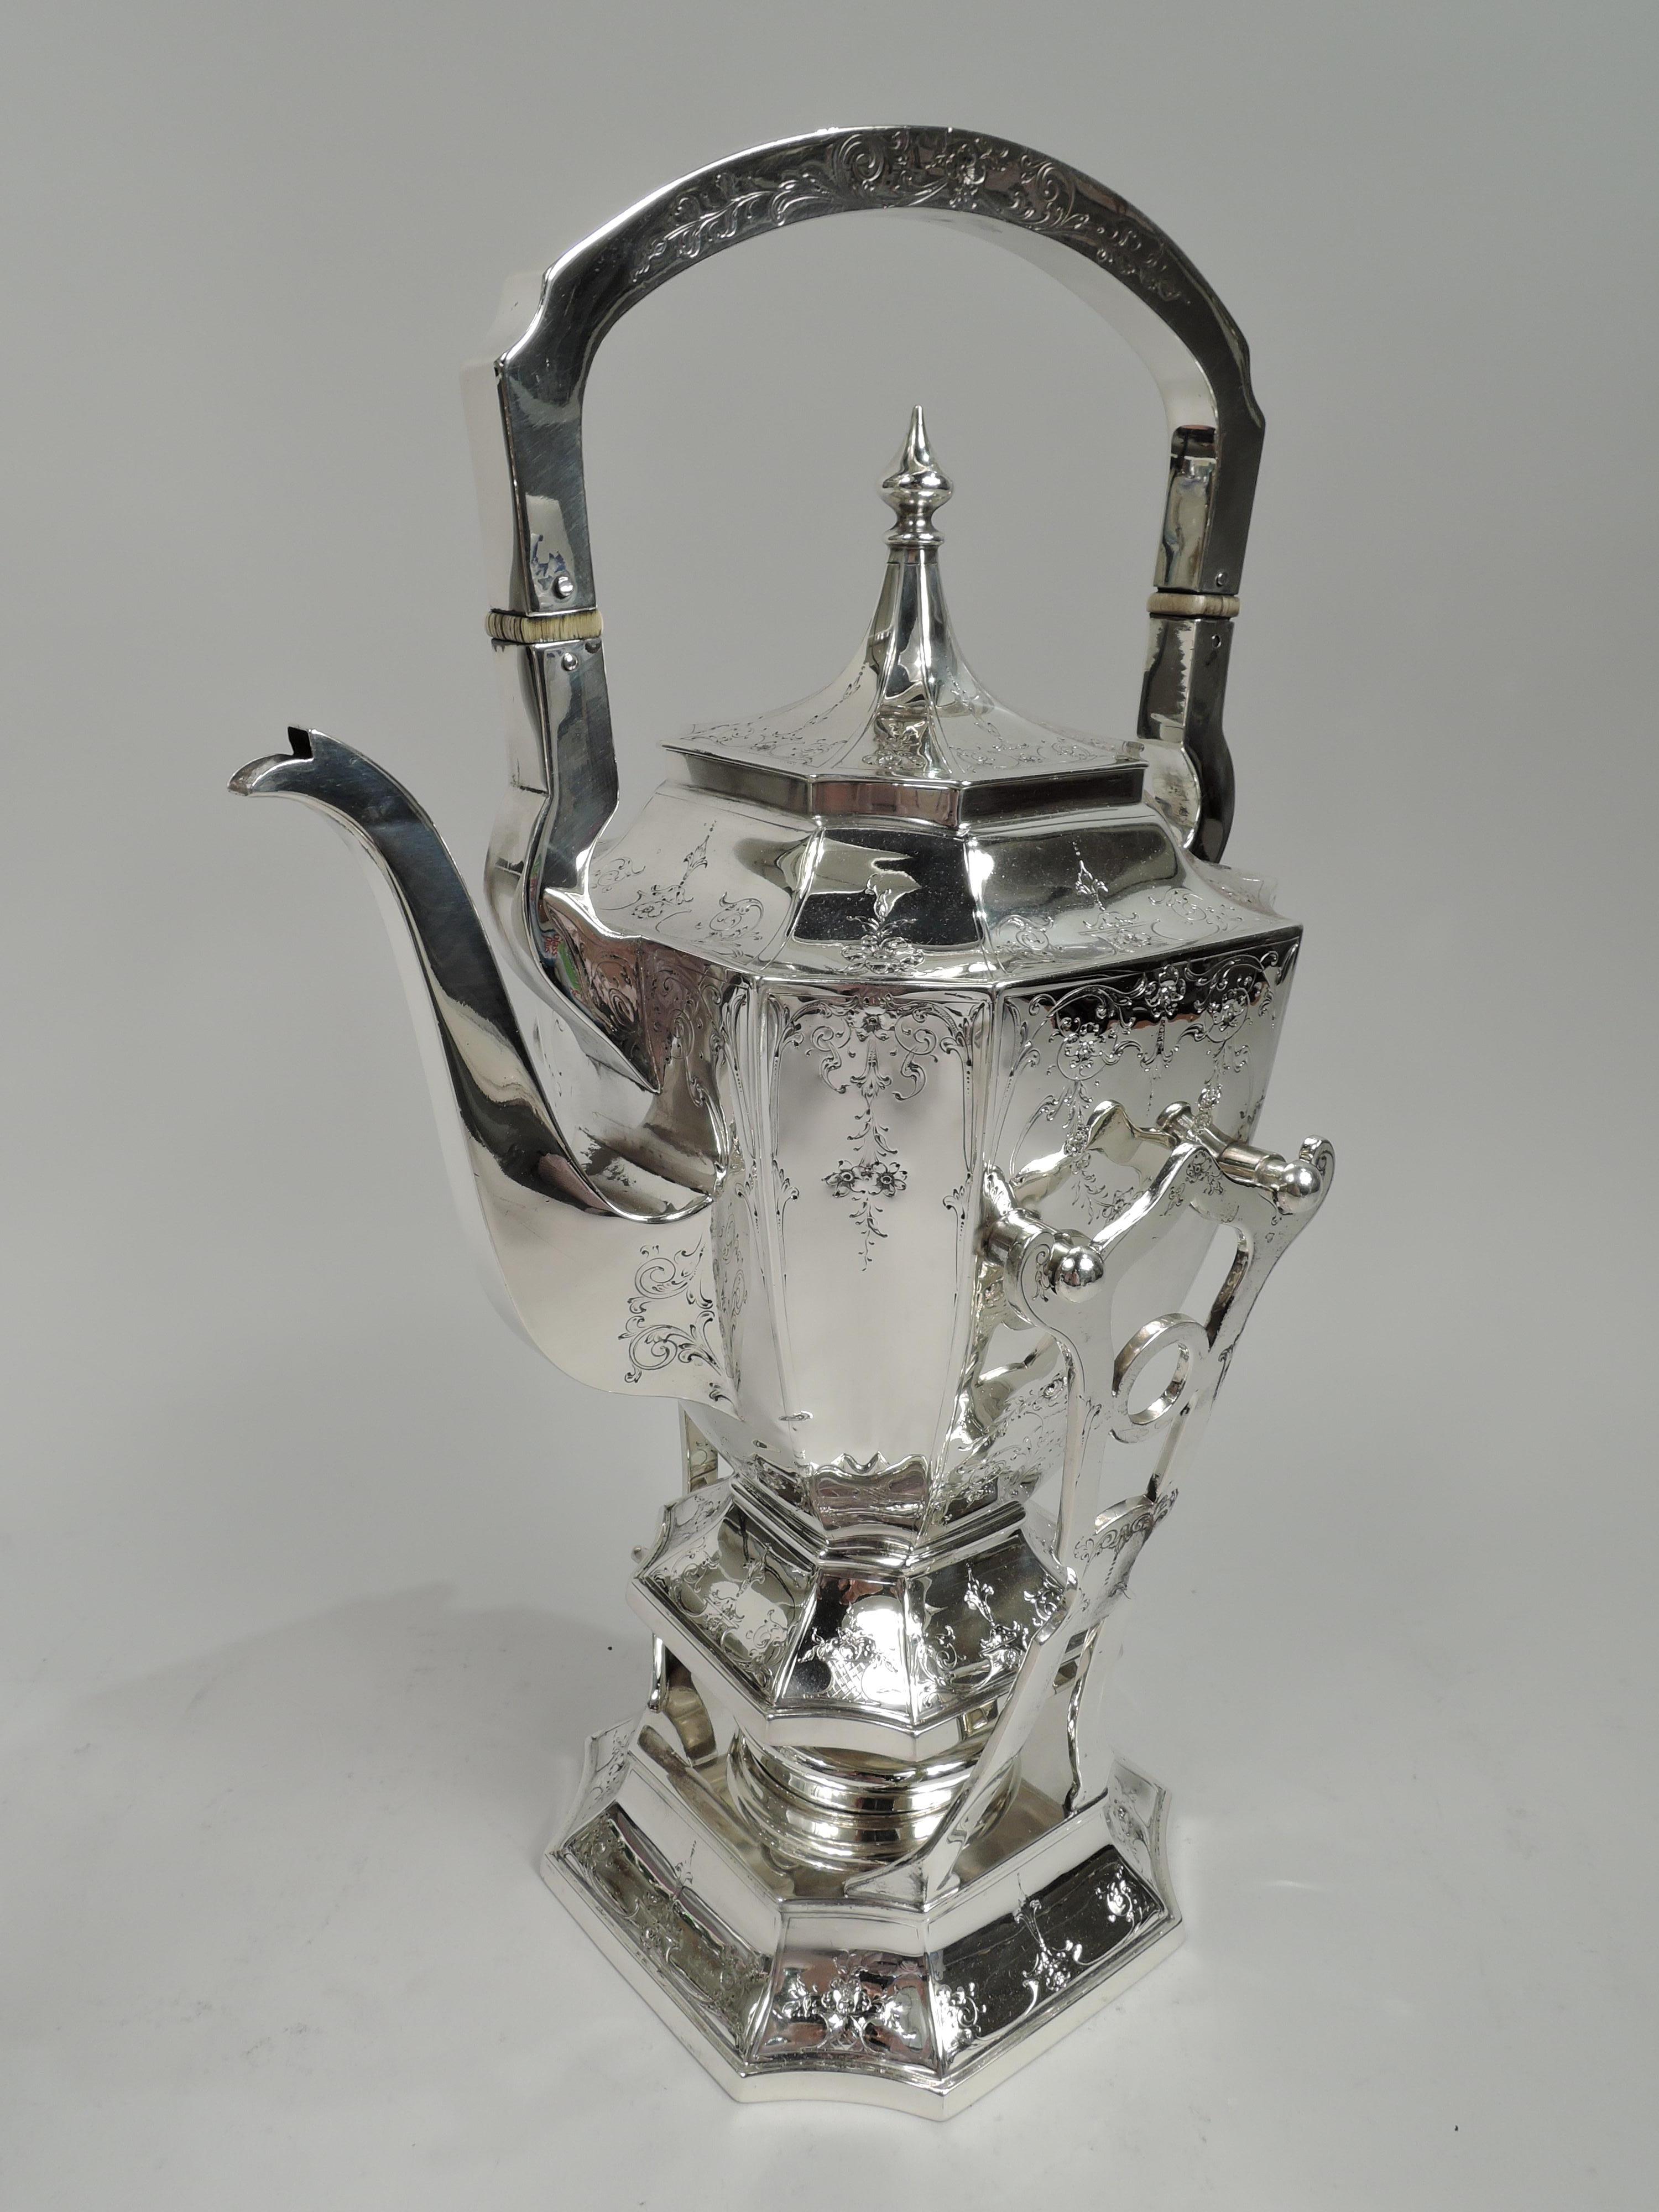 Cavell sterling silver coffee and tea set. Made by Barbour Silver Co. (part of International Silver Co.) in Connecticut, ca 1910. This set comprises kettle on stand, coffeepot, teapot, creamer, sugar, and waste bowl on tray.

All: Vertical and